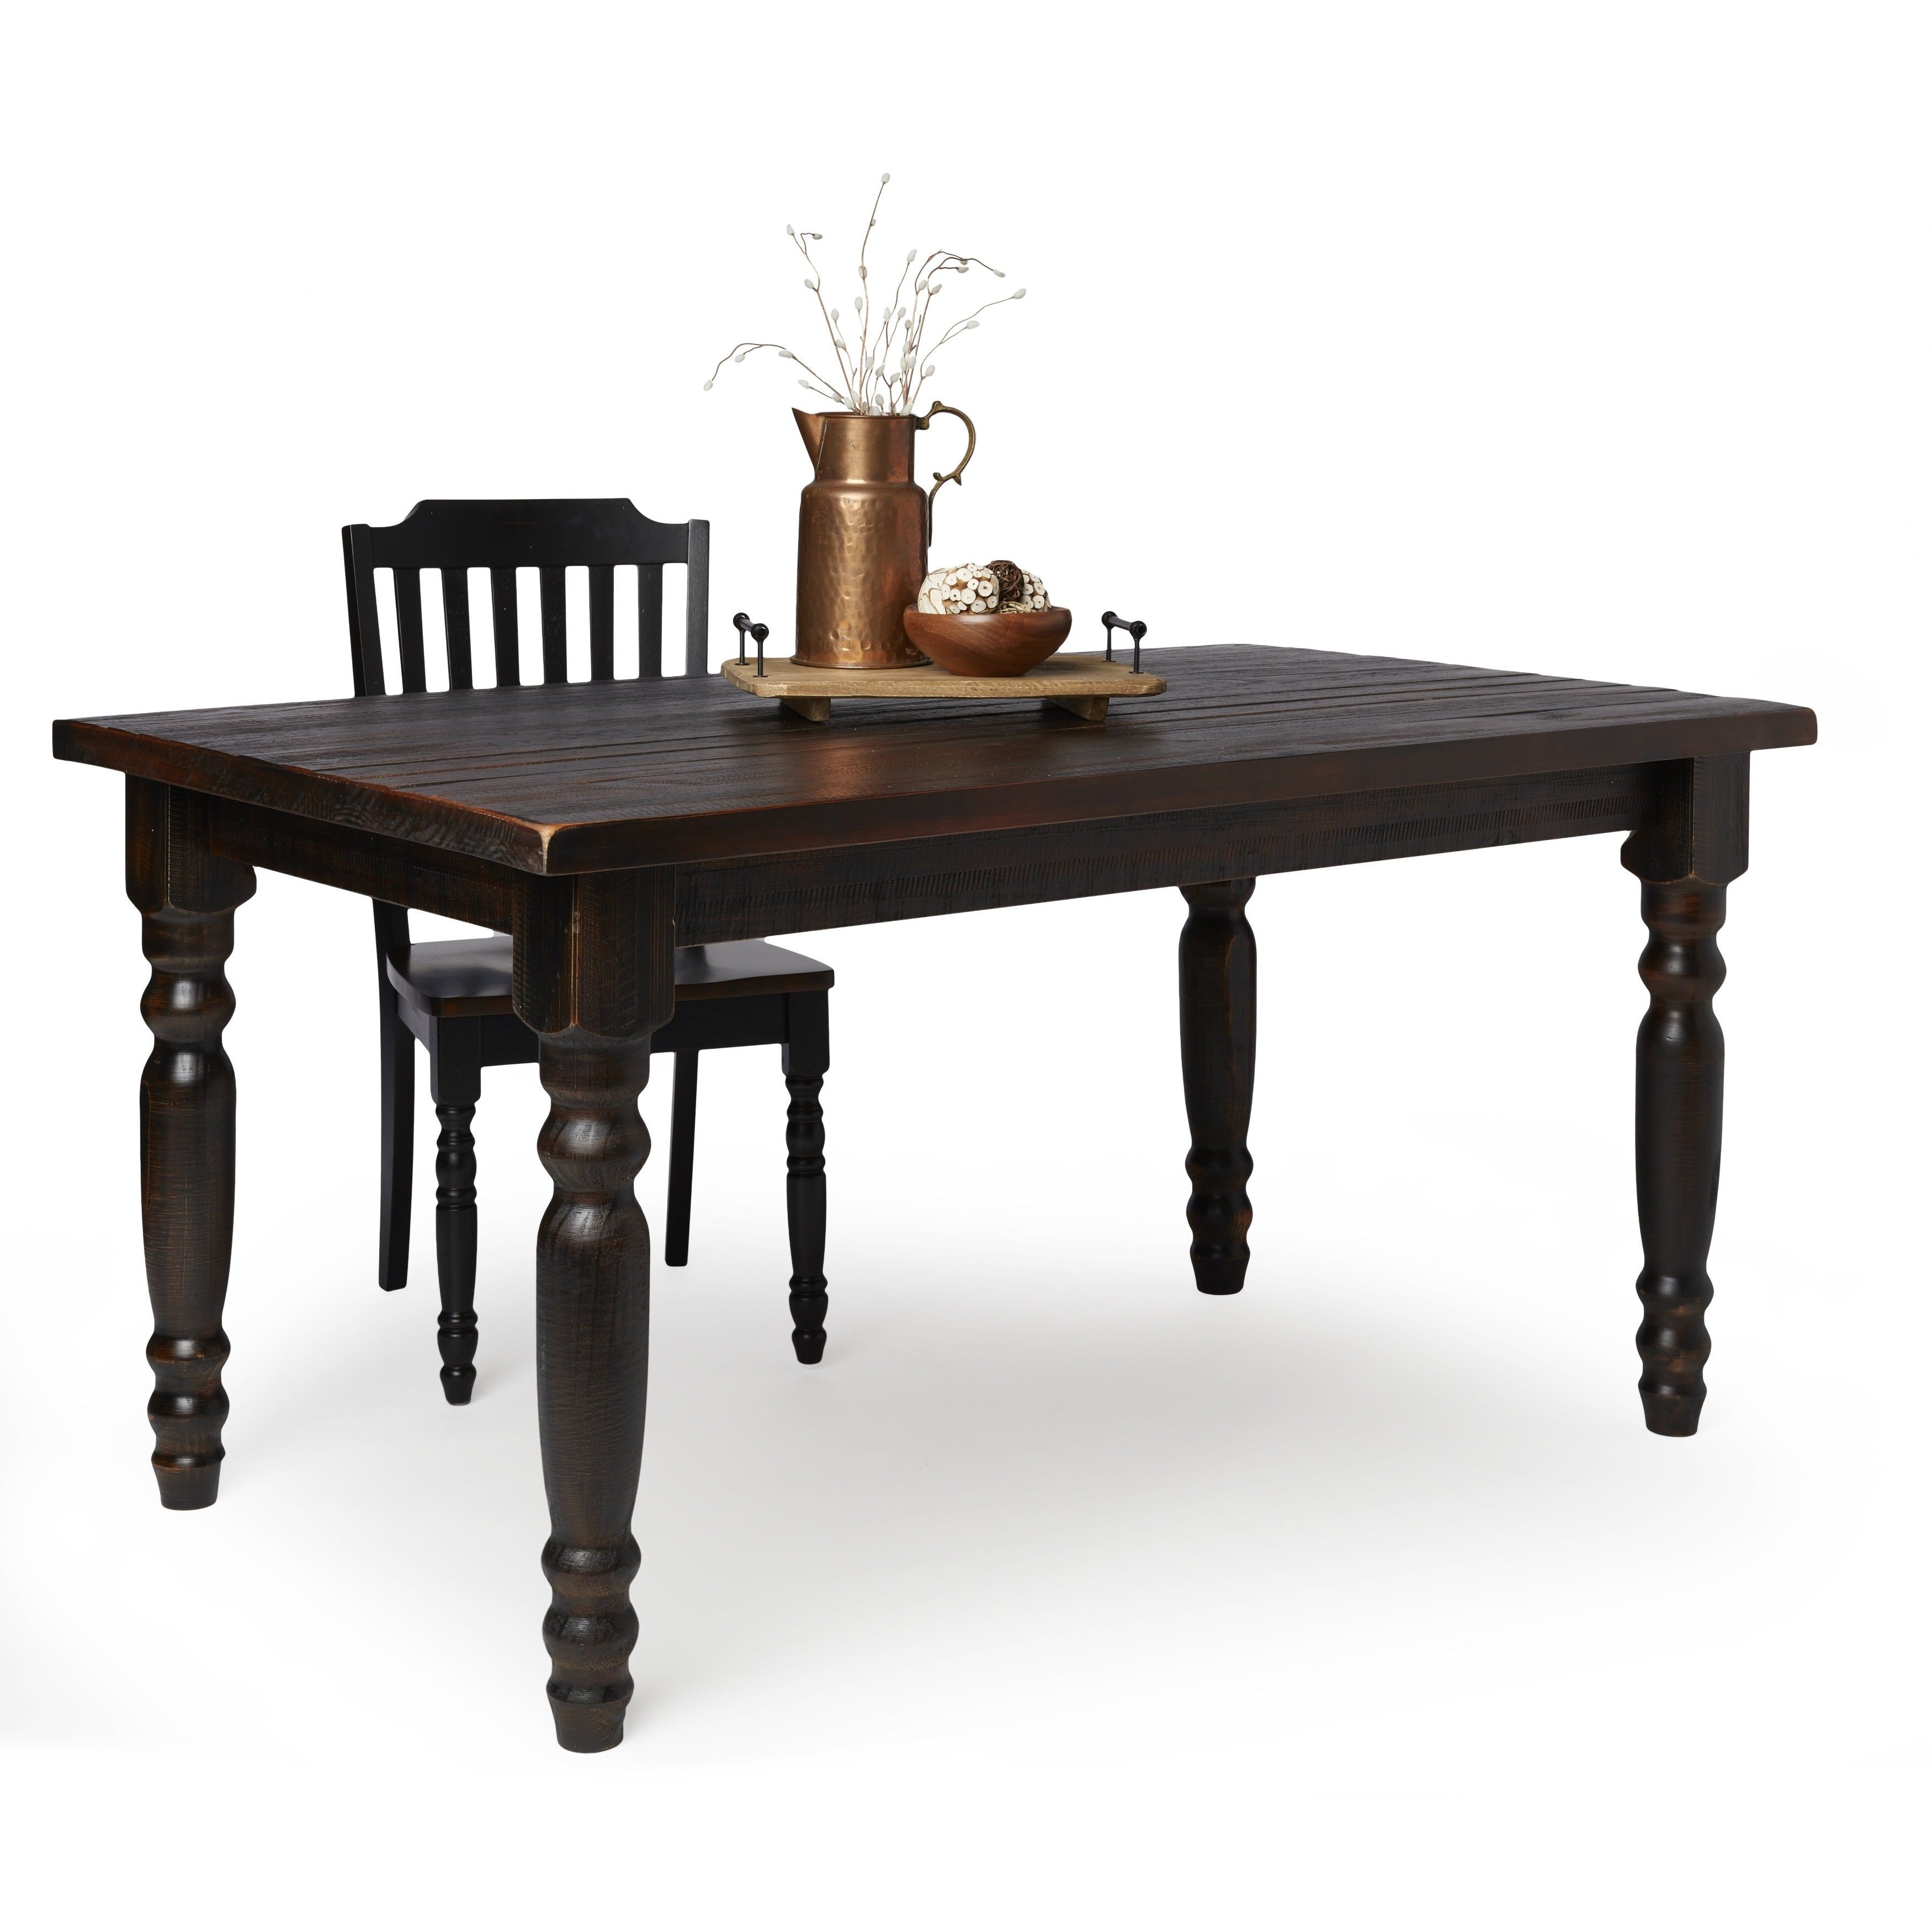 Grain Wood Furniture Valerie 63 Inch Solid Wood Dining Table Inside Most Recently Released Evellen 5 Piece Solid Wood Dining Sets (Set Of 5) (View 13 of 20)